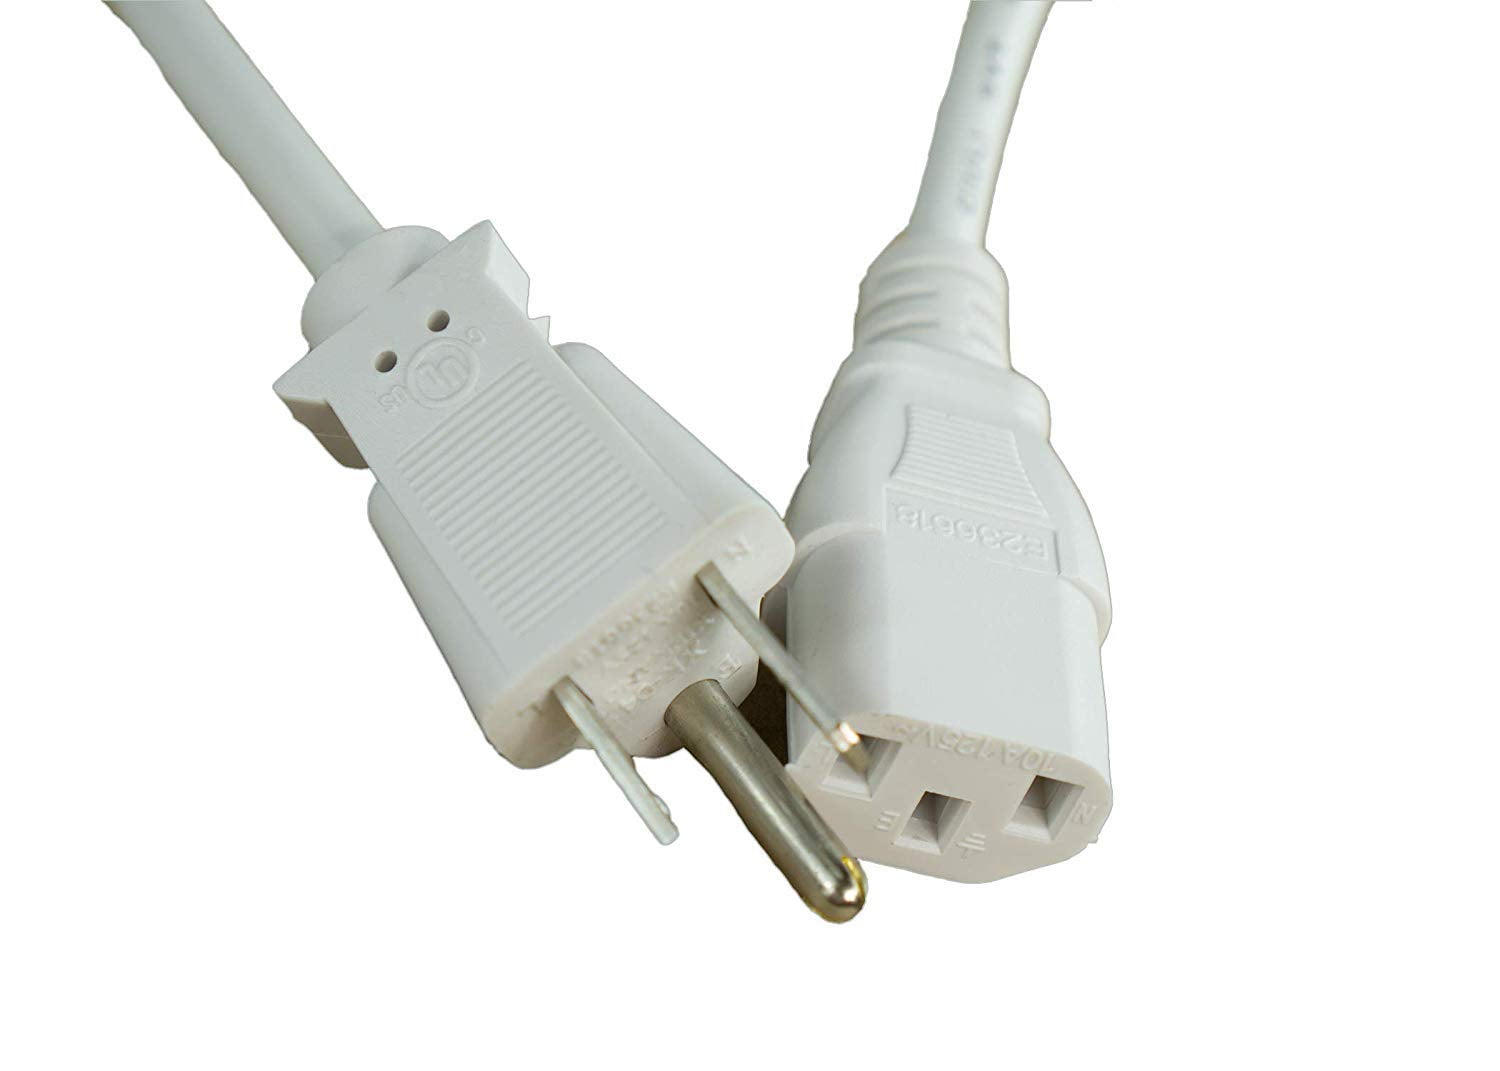 OMNIHIL 30 Feet Long High Speed USB 2.0 Cable Compatible with HP Color Laserjet PRO MFP M283FDW 